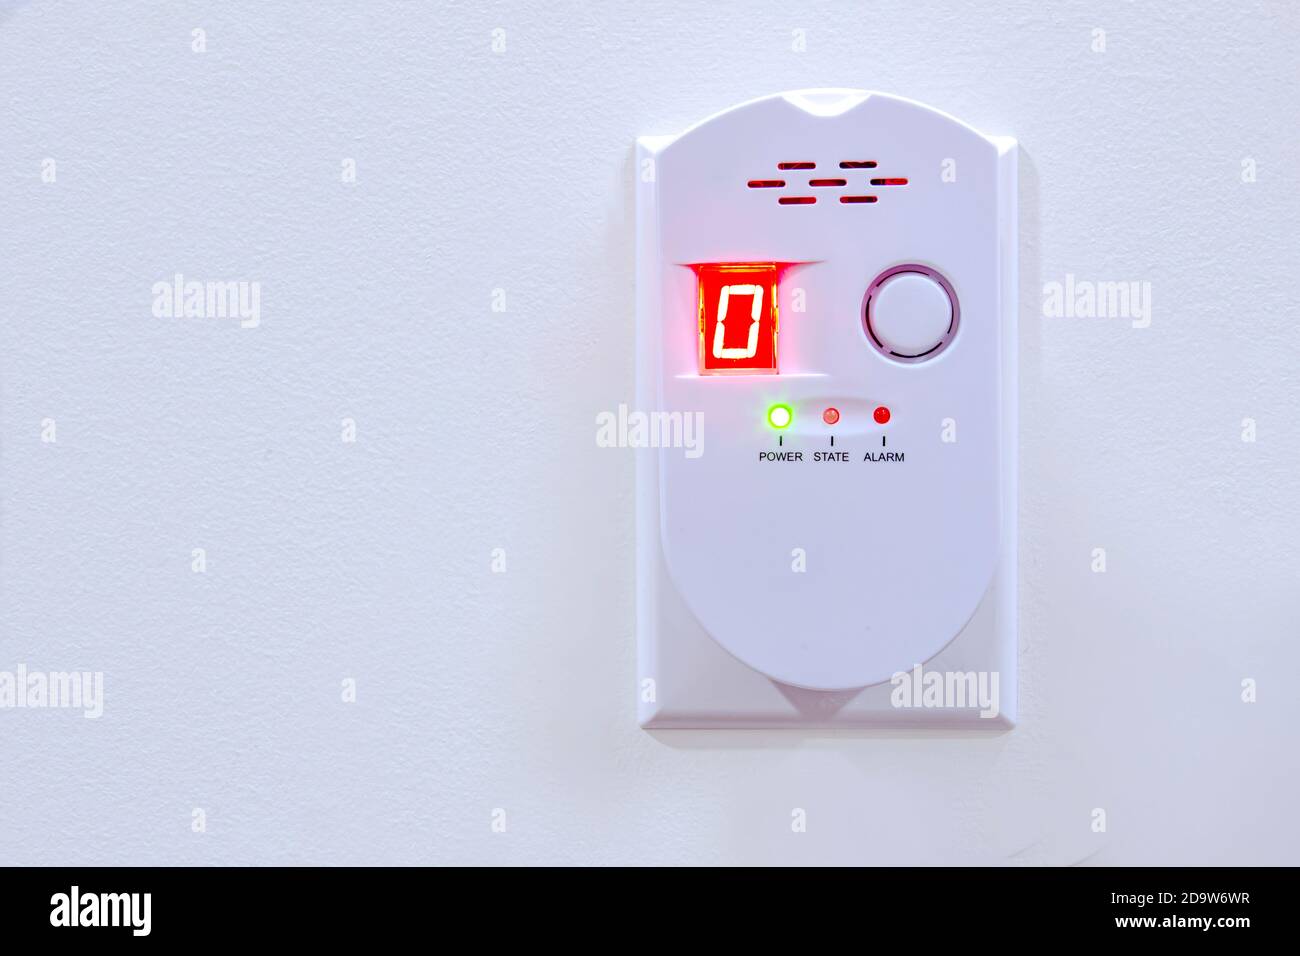 Natural Gas Detector, Gas Alarm Detector LPG Gas Leak Sensor Plug-in Gas Detector with Sound Warning and LED Display for House Kitchen Restaurant Hote Stock Photo